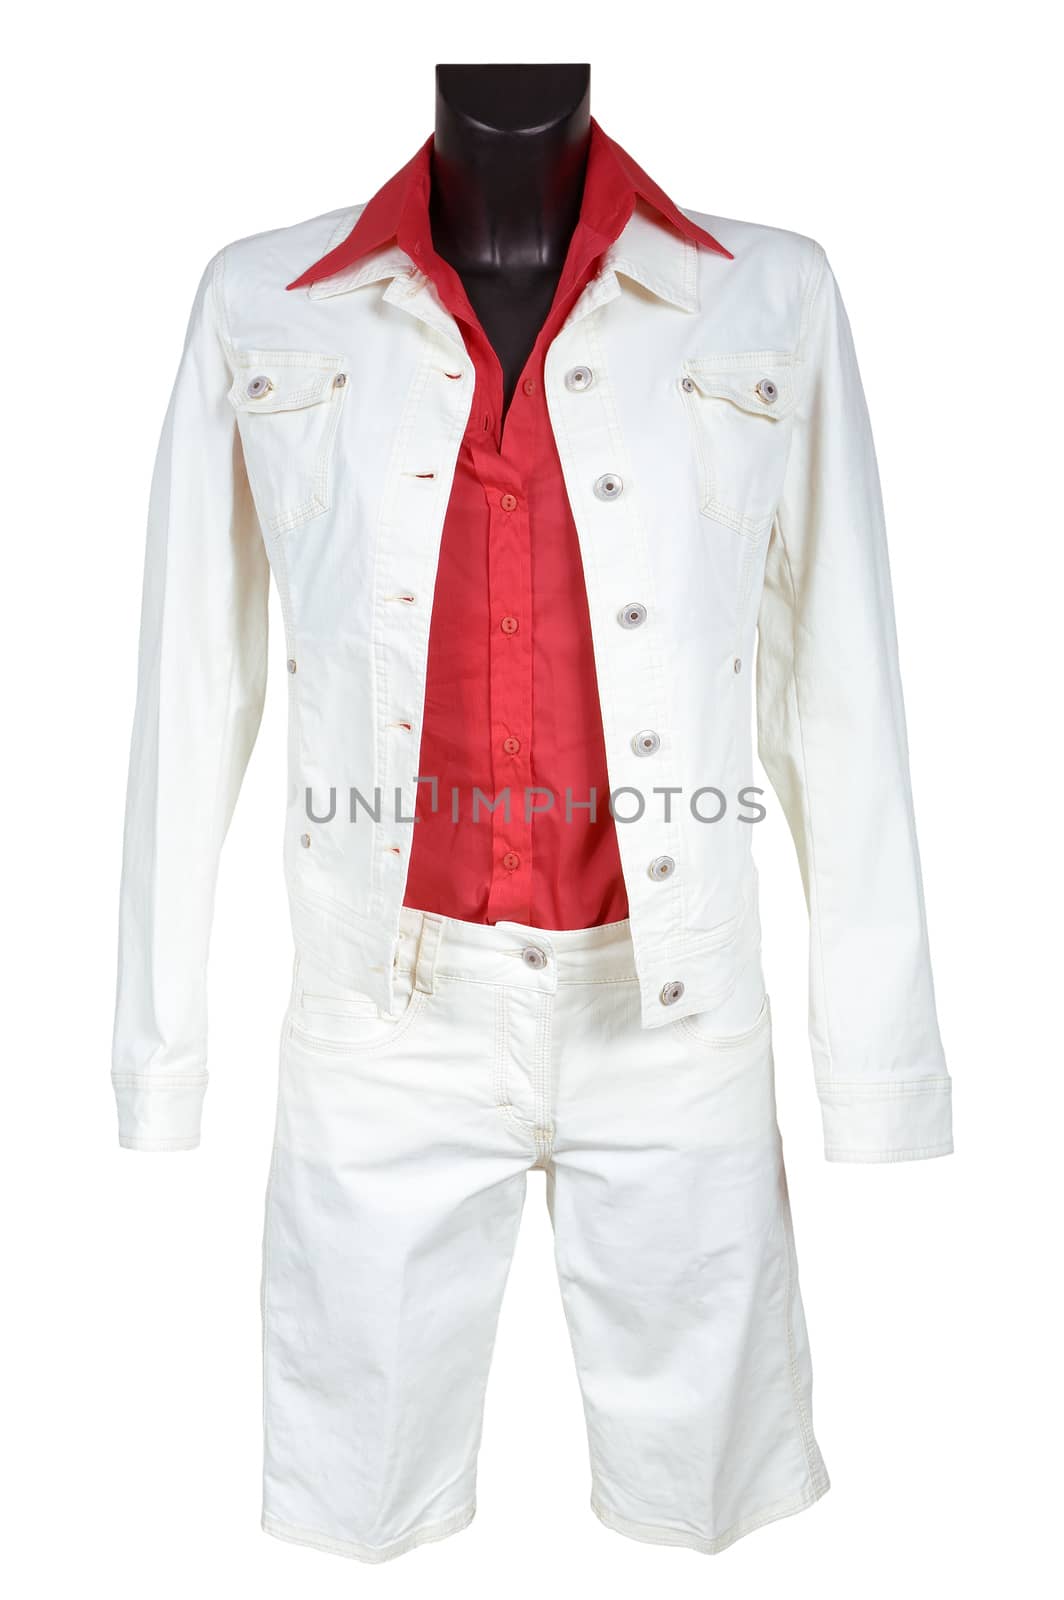 White jeans suit by terex